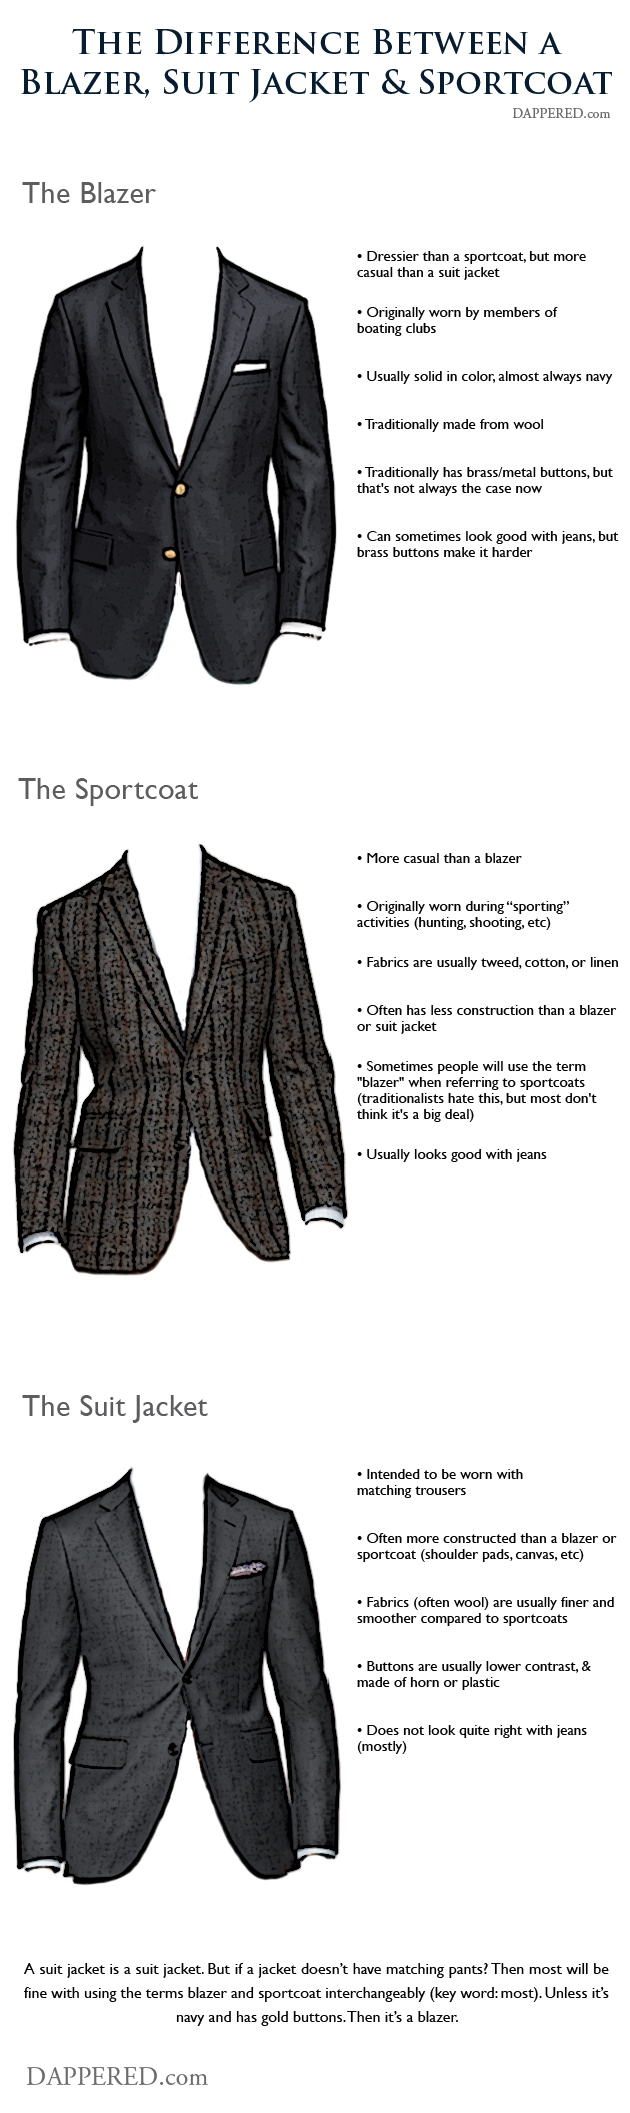 How To Tell The Difference Between A Blazer And Suit Jacket - hotmailav